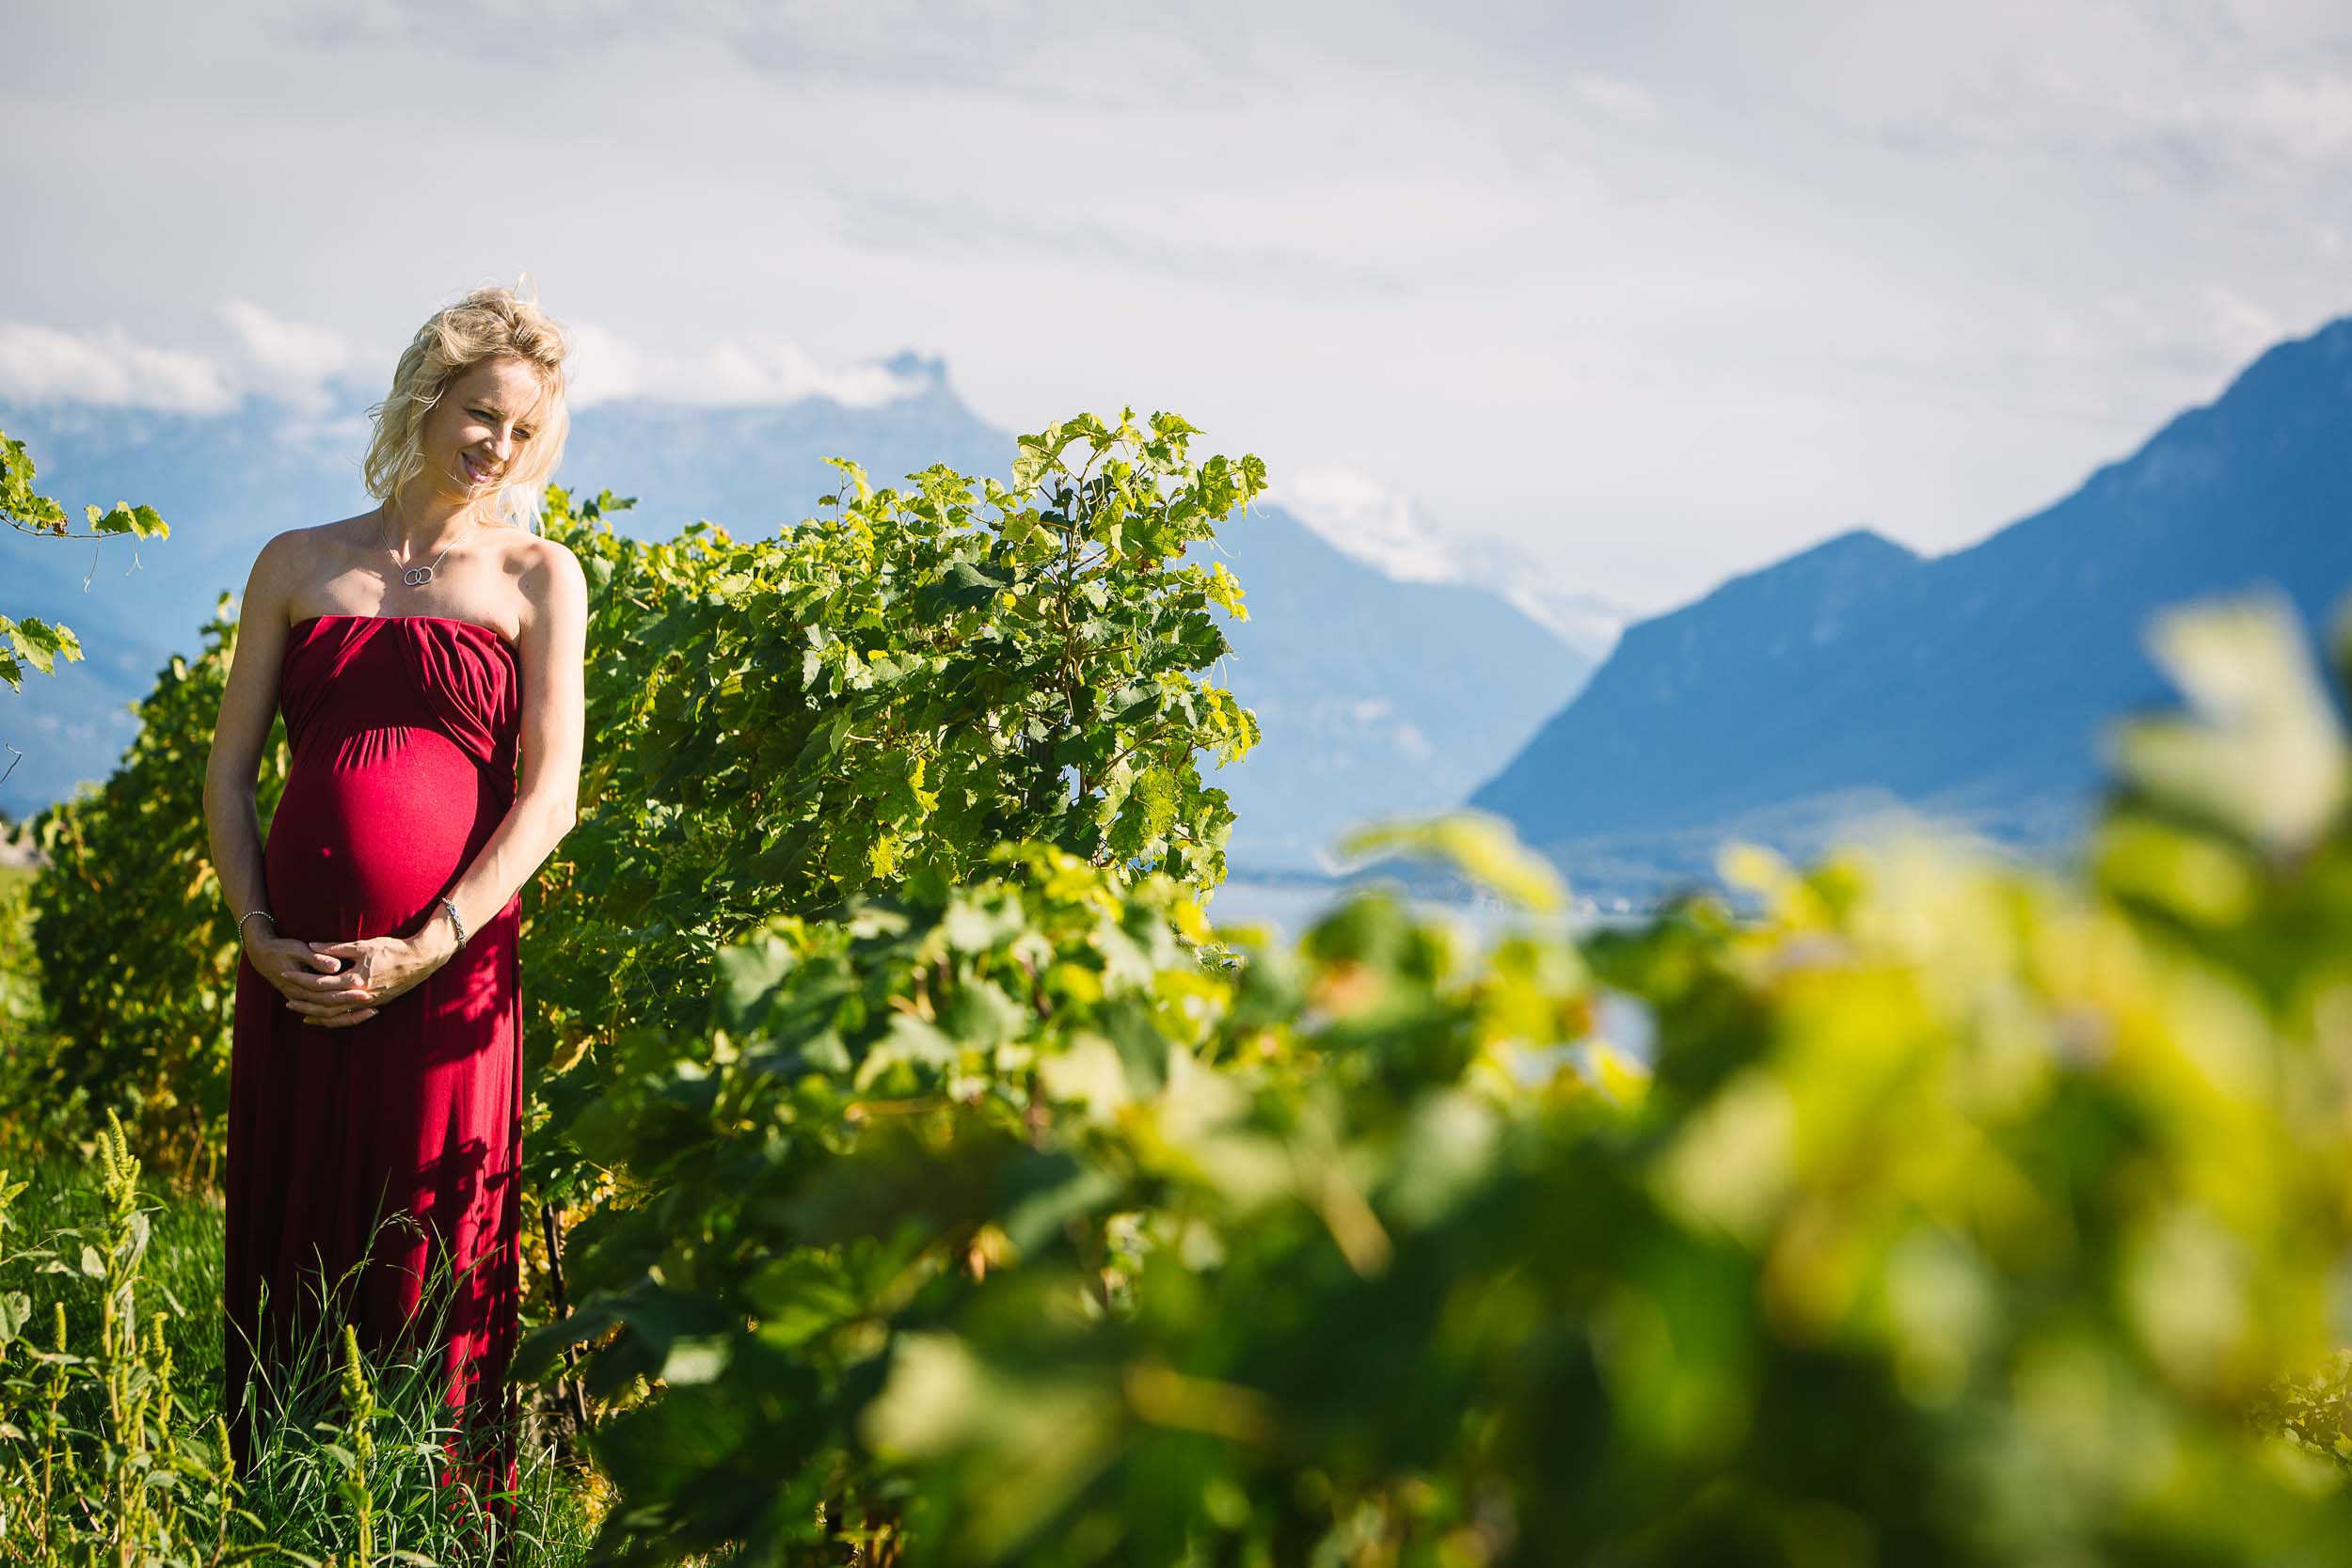 Summer maternity shoot in the Lavaux vineyards | Maryna & Andre